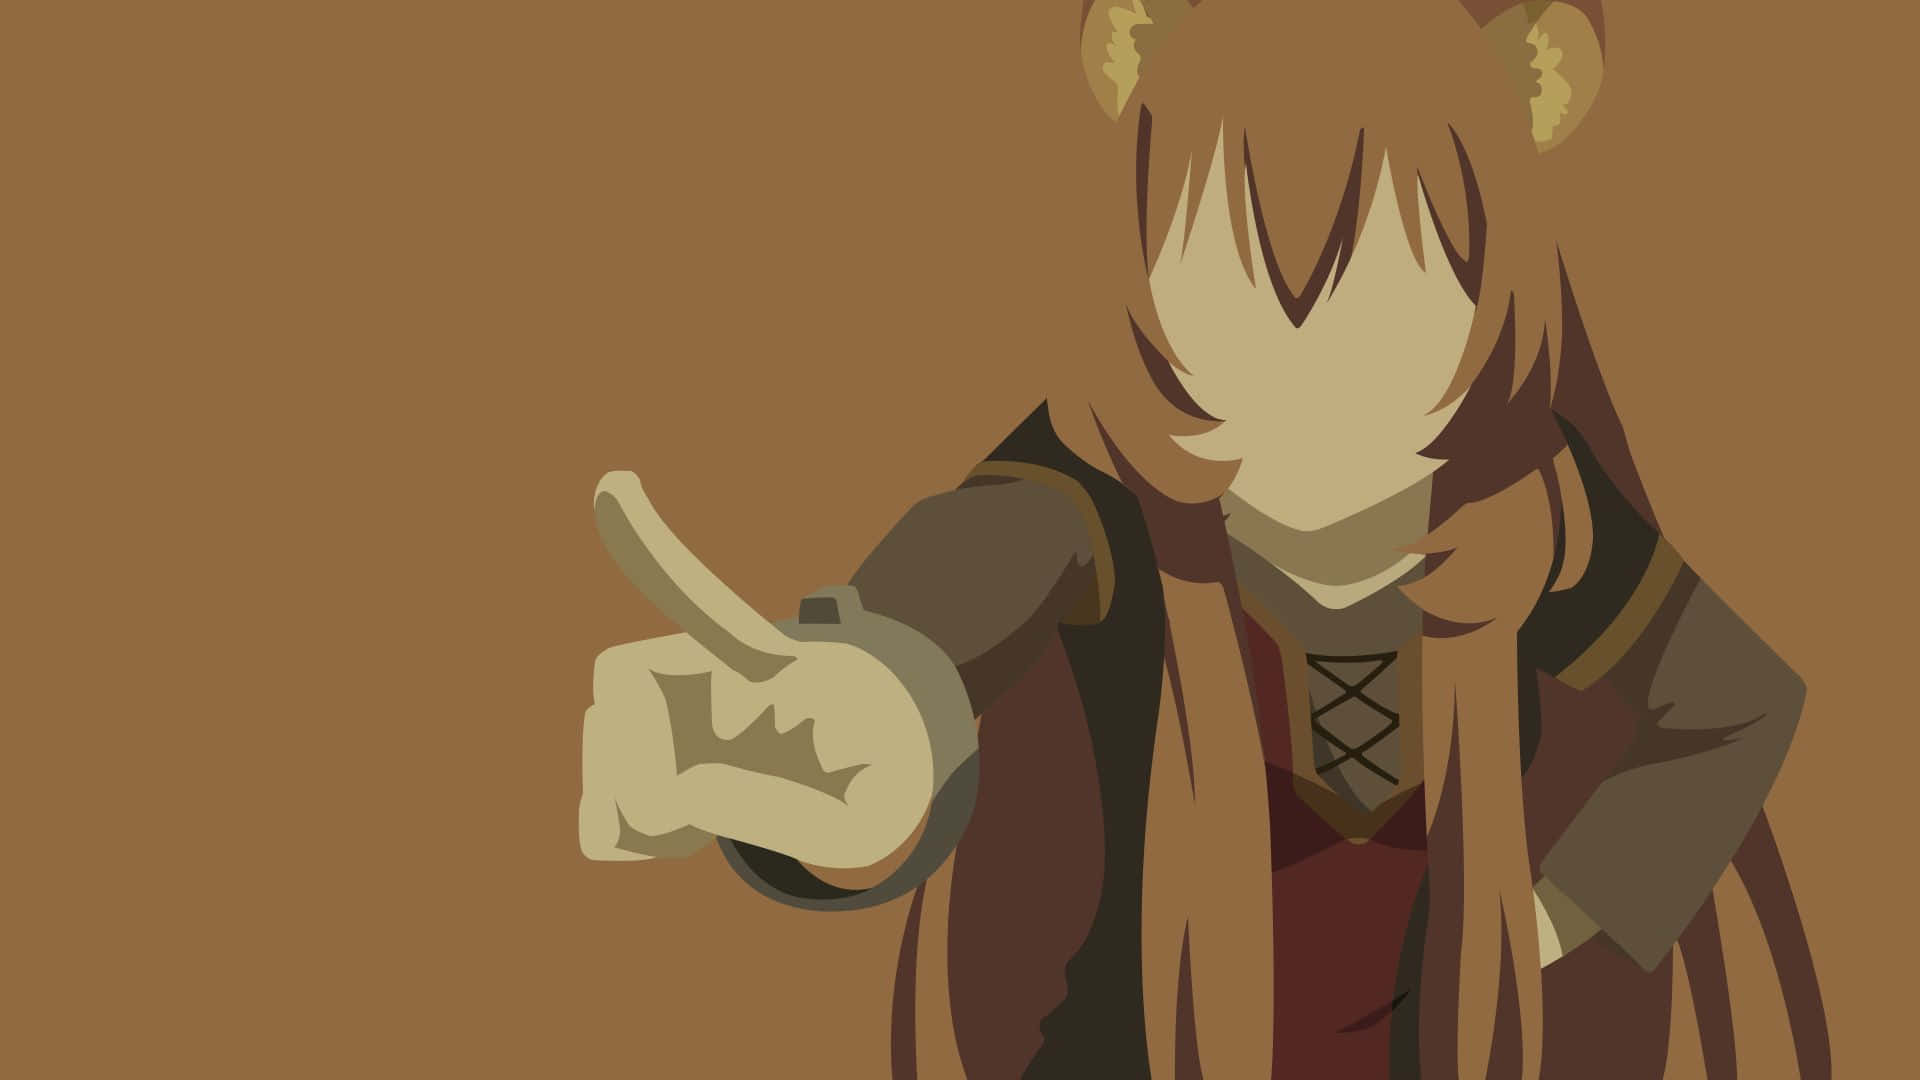 An illustration of Naofumi Iwatani, the protagonist of The Rising of the Shield Hero.